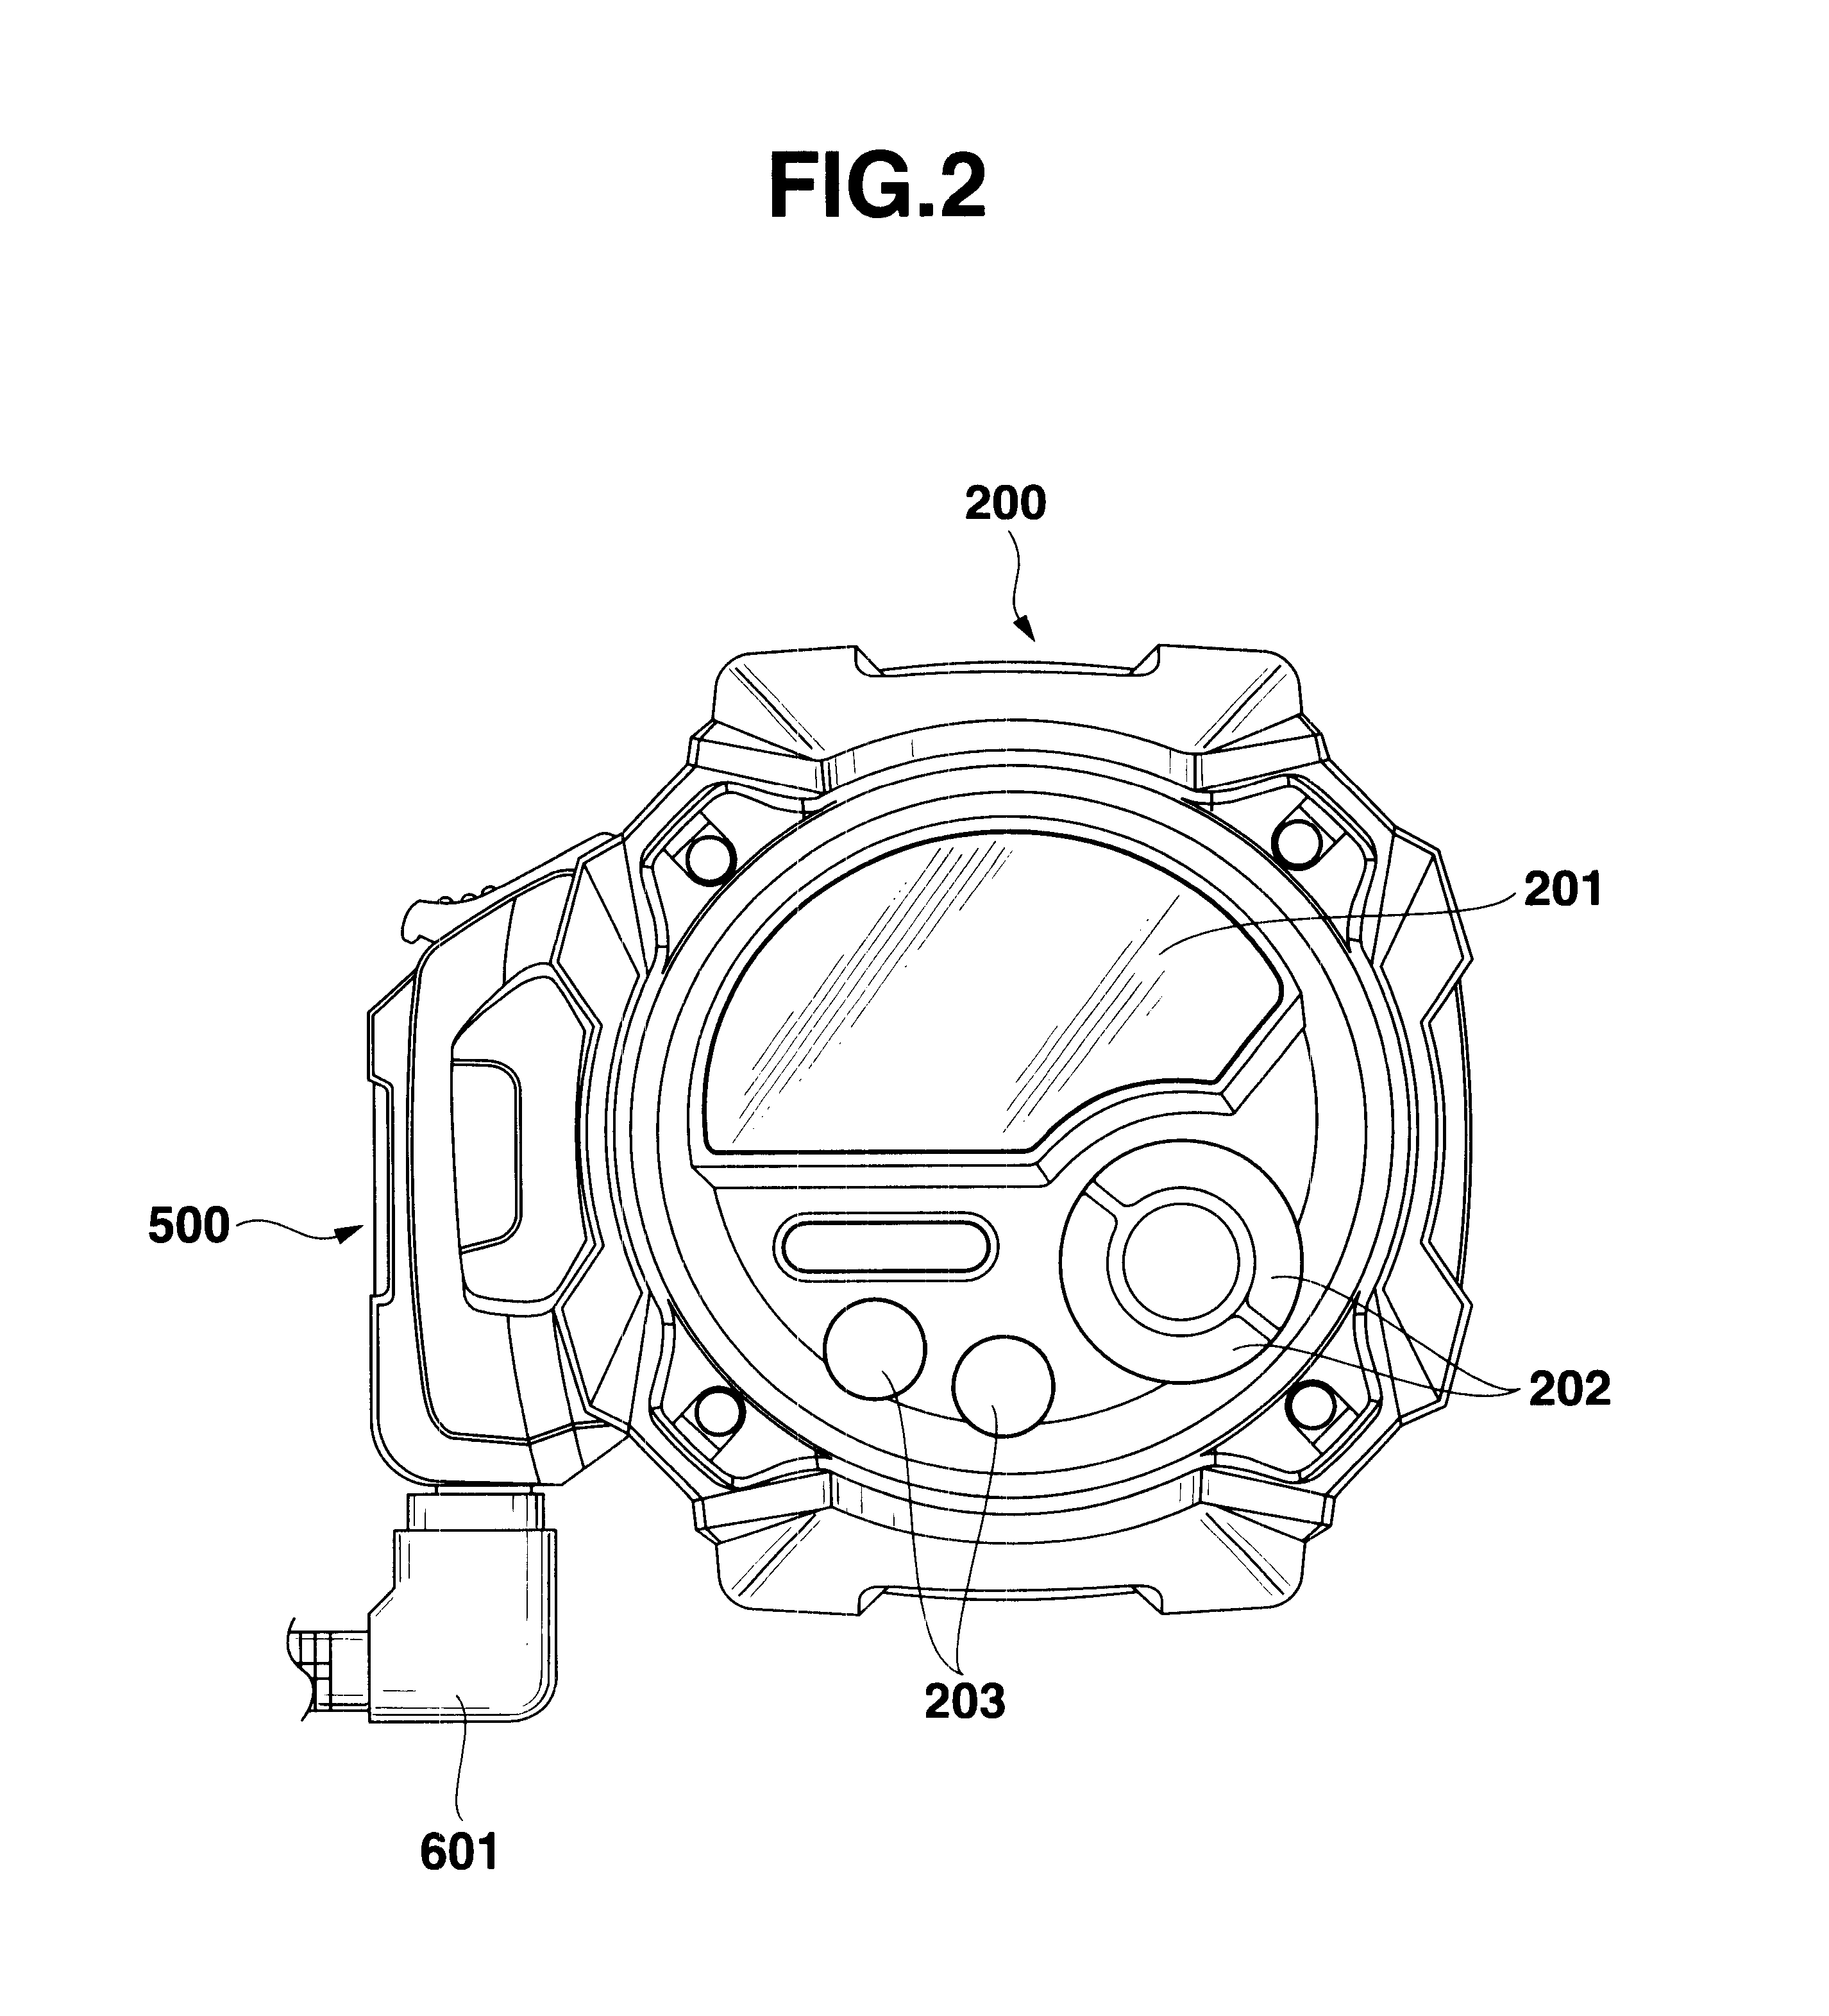 Adapter for external connection and electronic apparatus